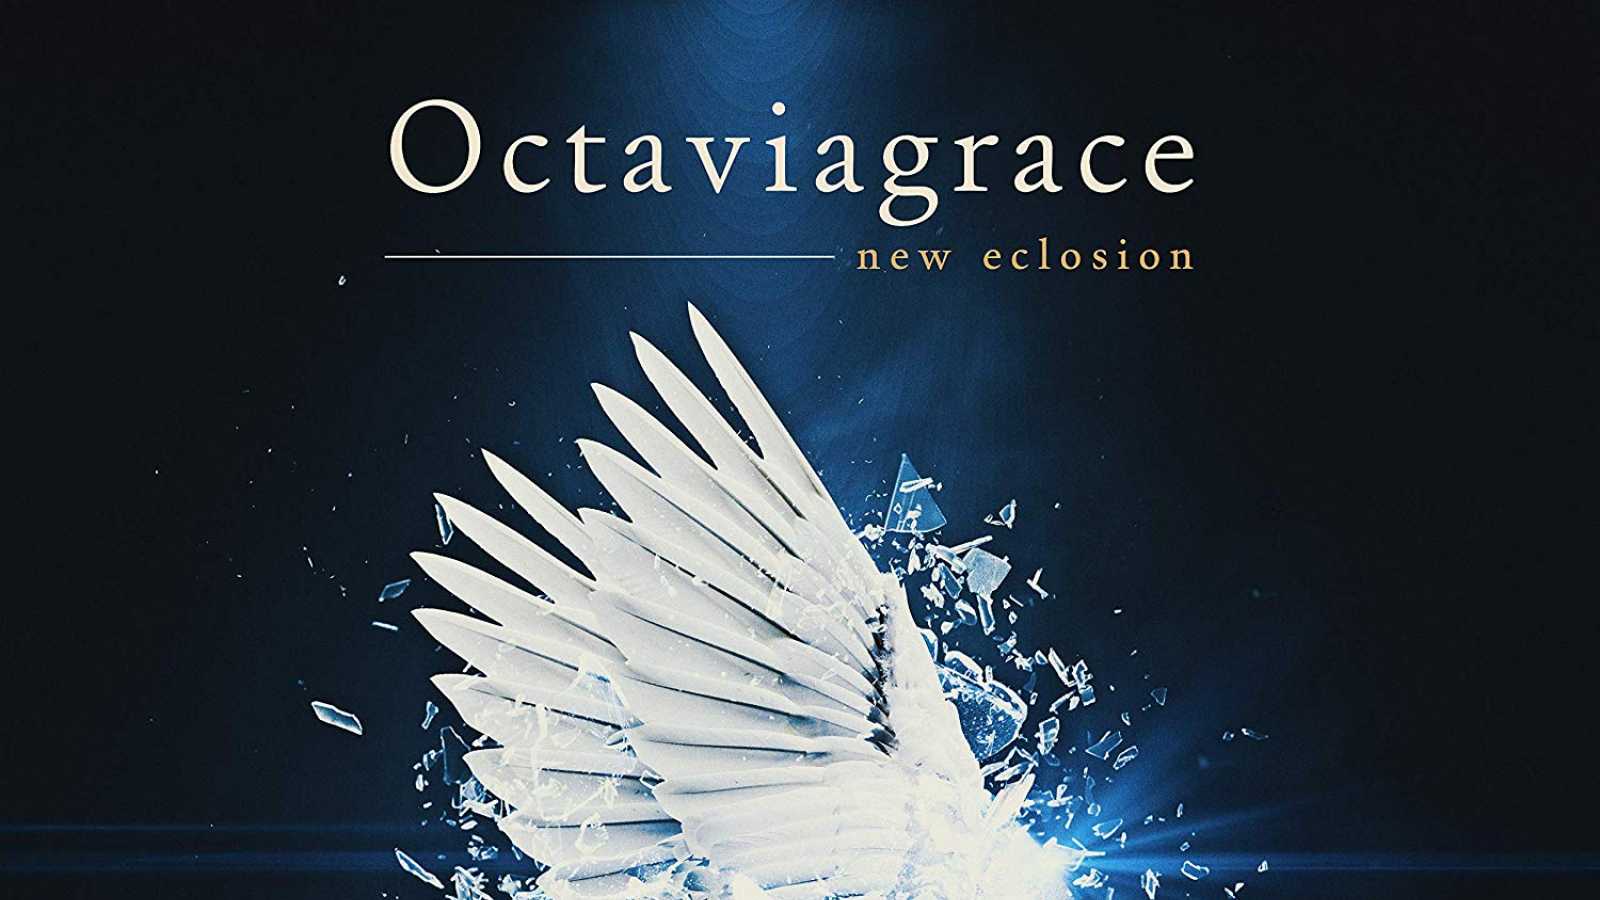 ﻿Octaviagrace - new eclosion © Tengusakura. All rights reserved.